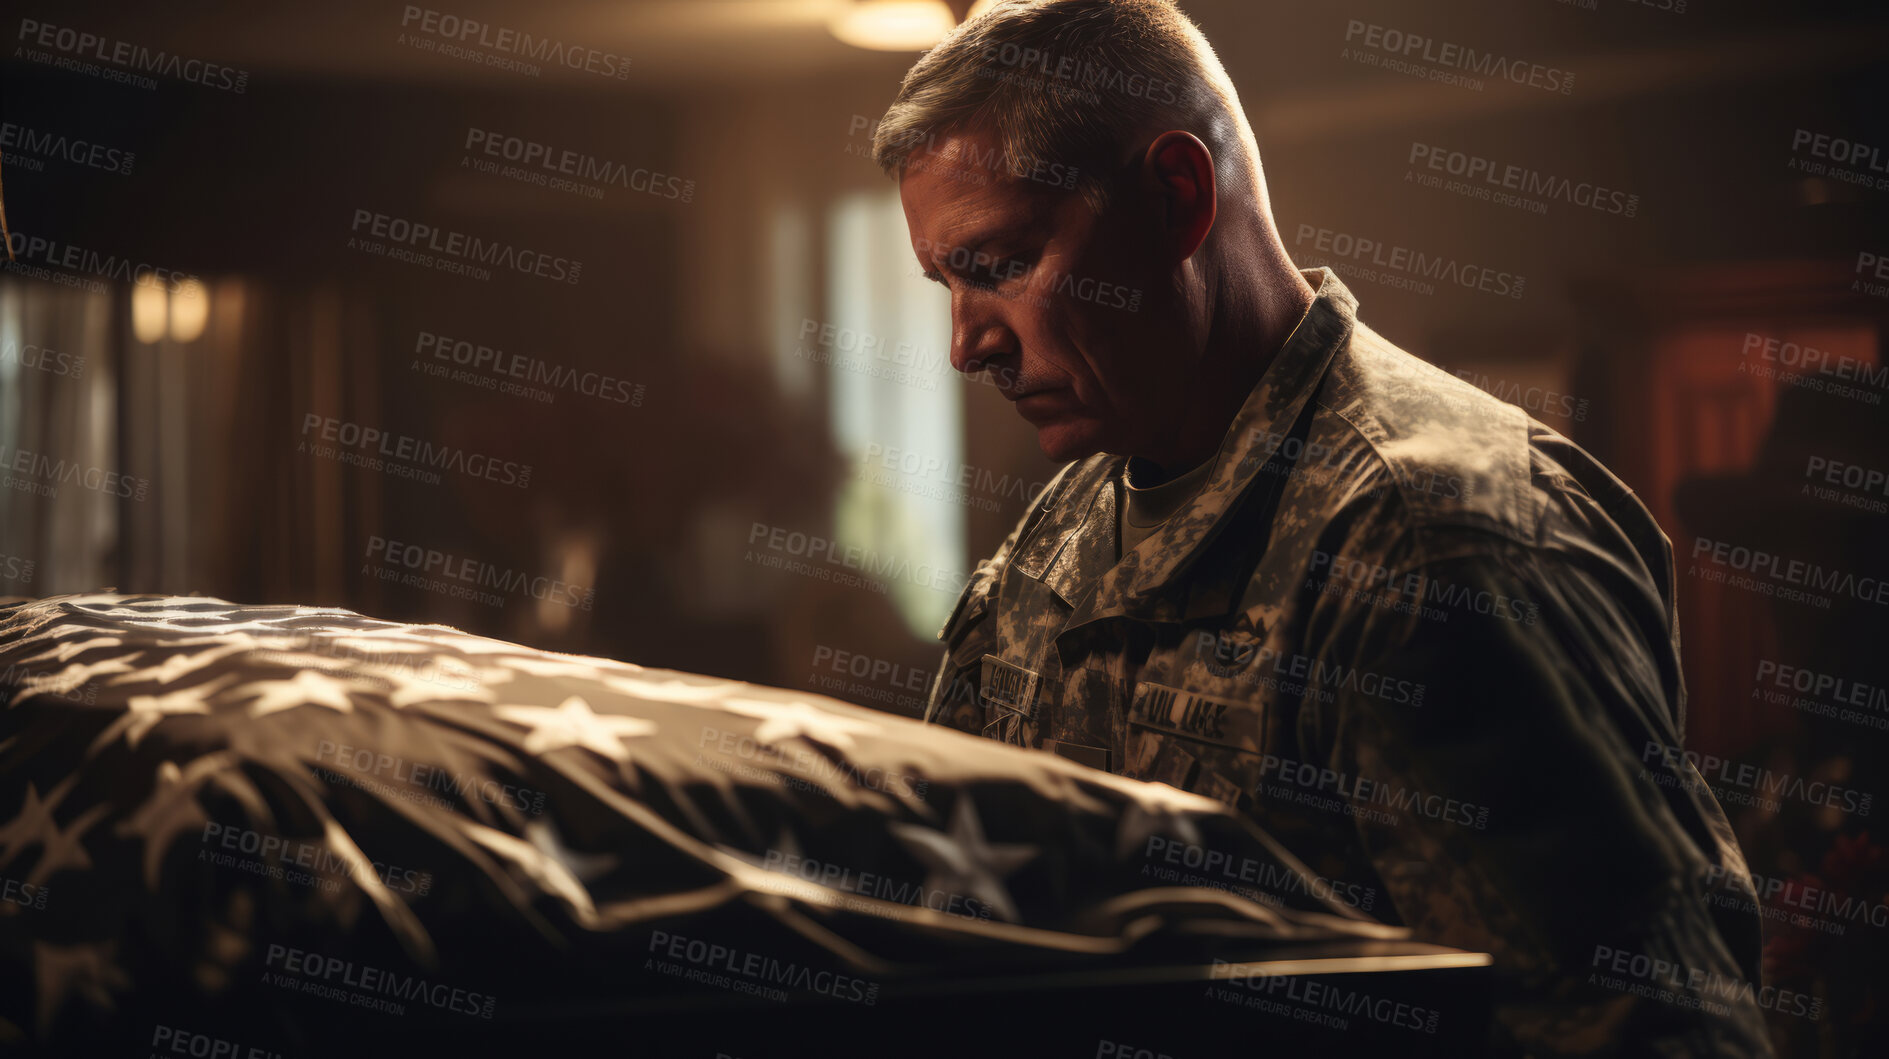 Buy stock photo Soldier mourning death of friend. Standing at coffin. Funeral service.